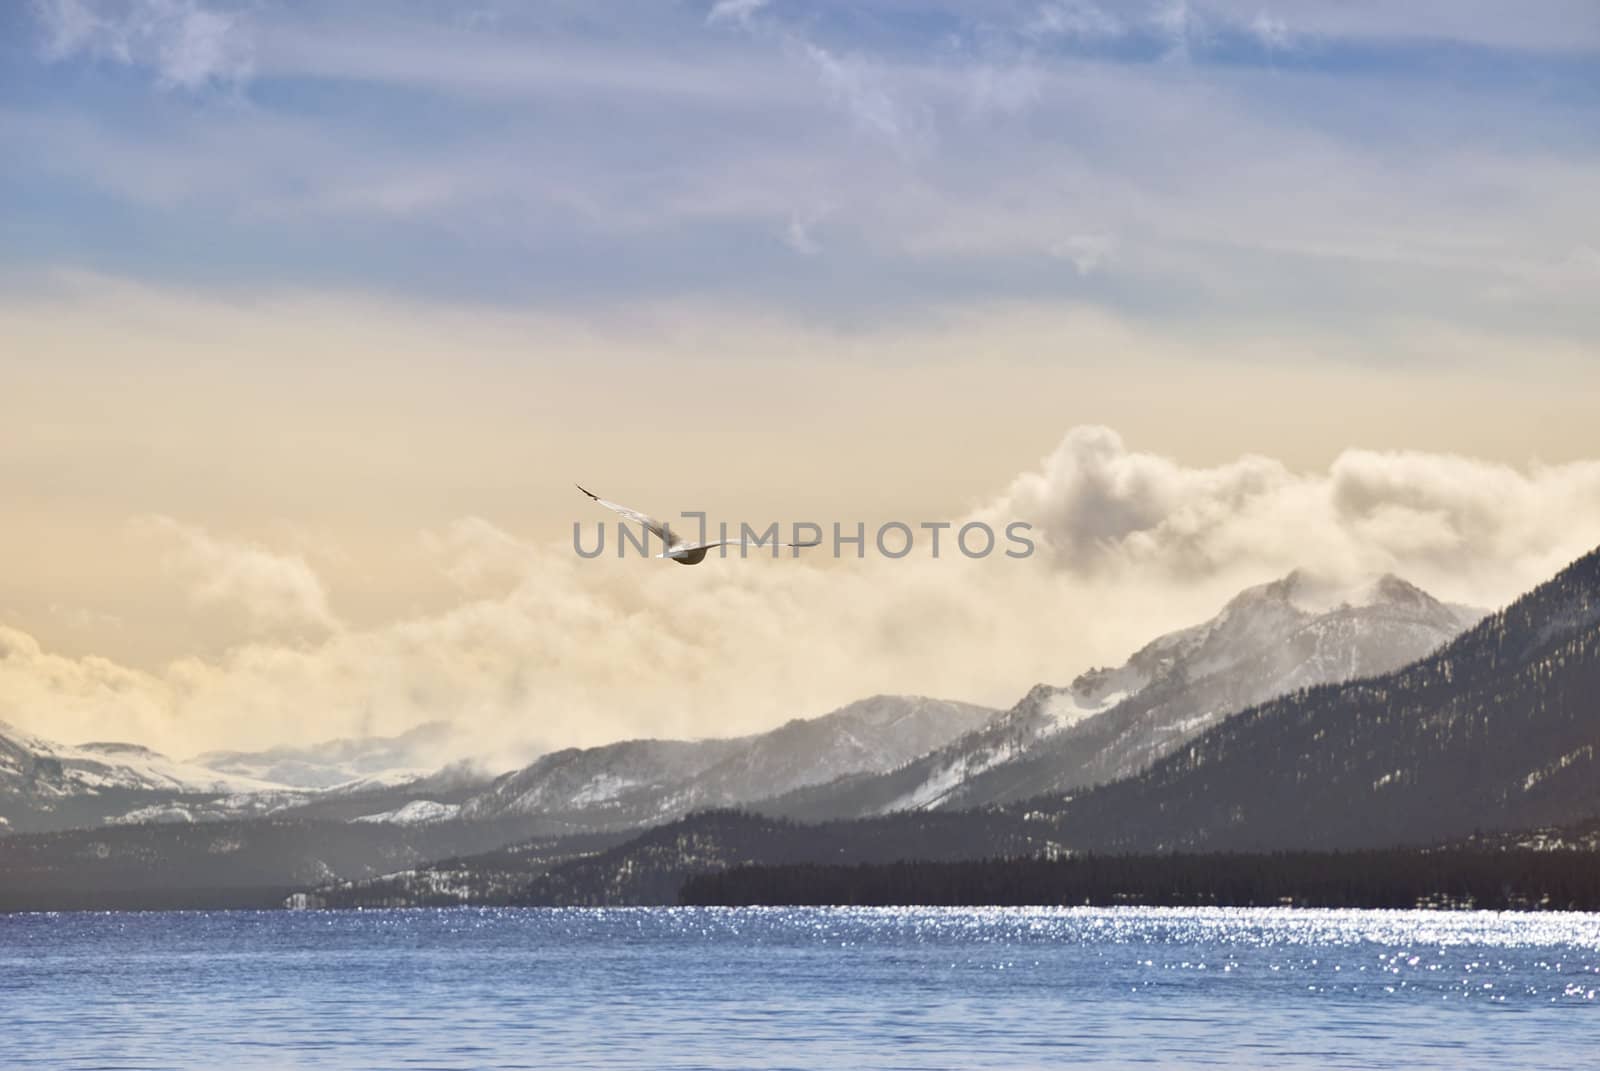 Focus on a seagull flying over lake Tahoe in winter, against slightly blurred landscape.